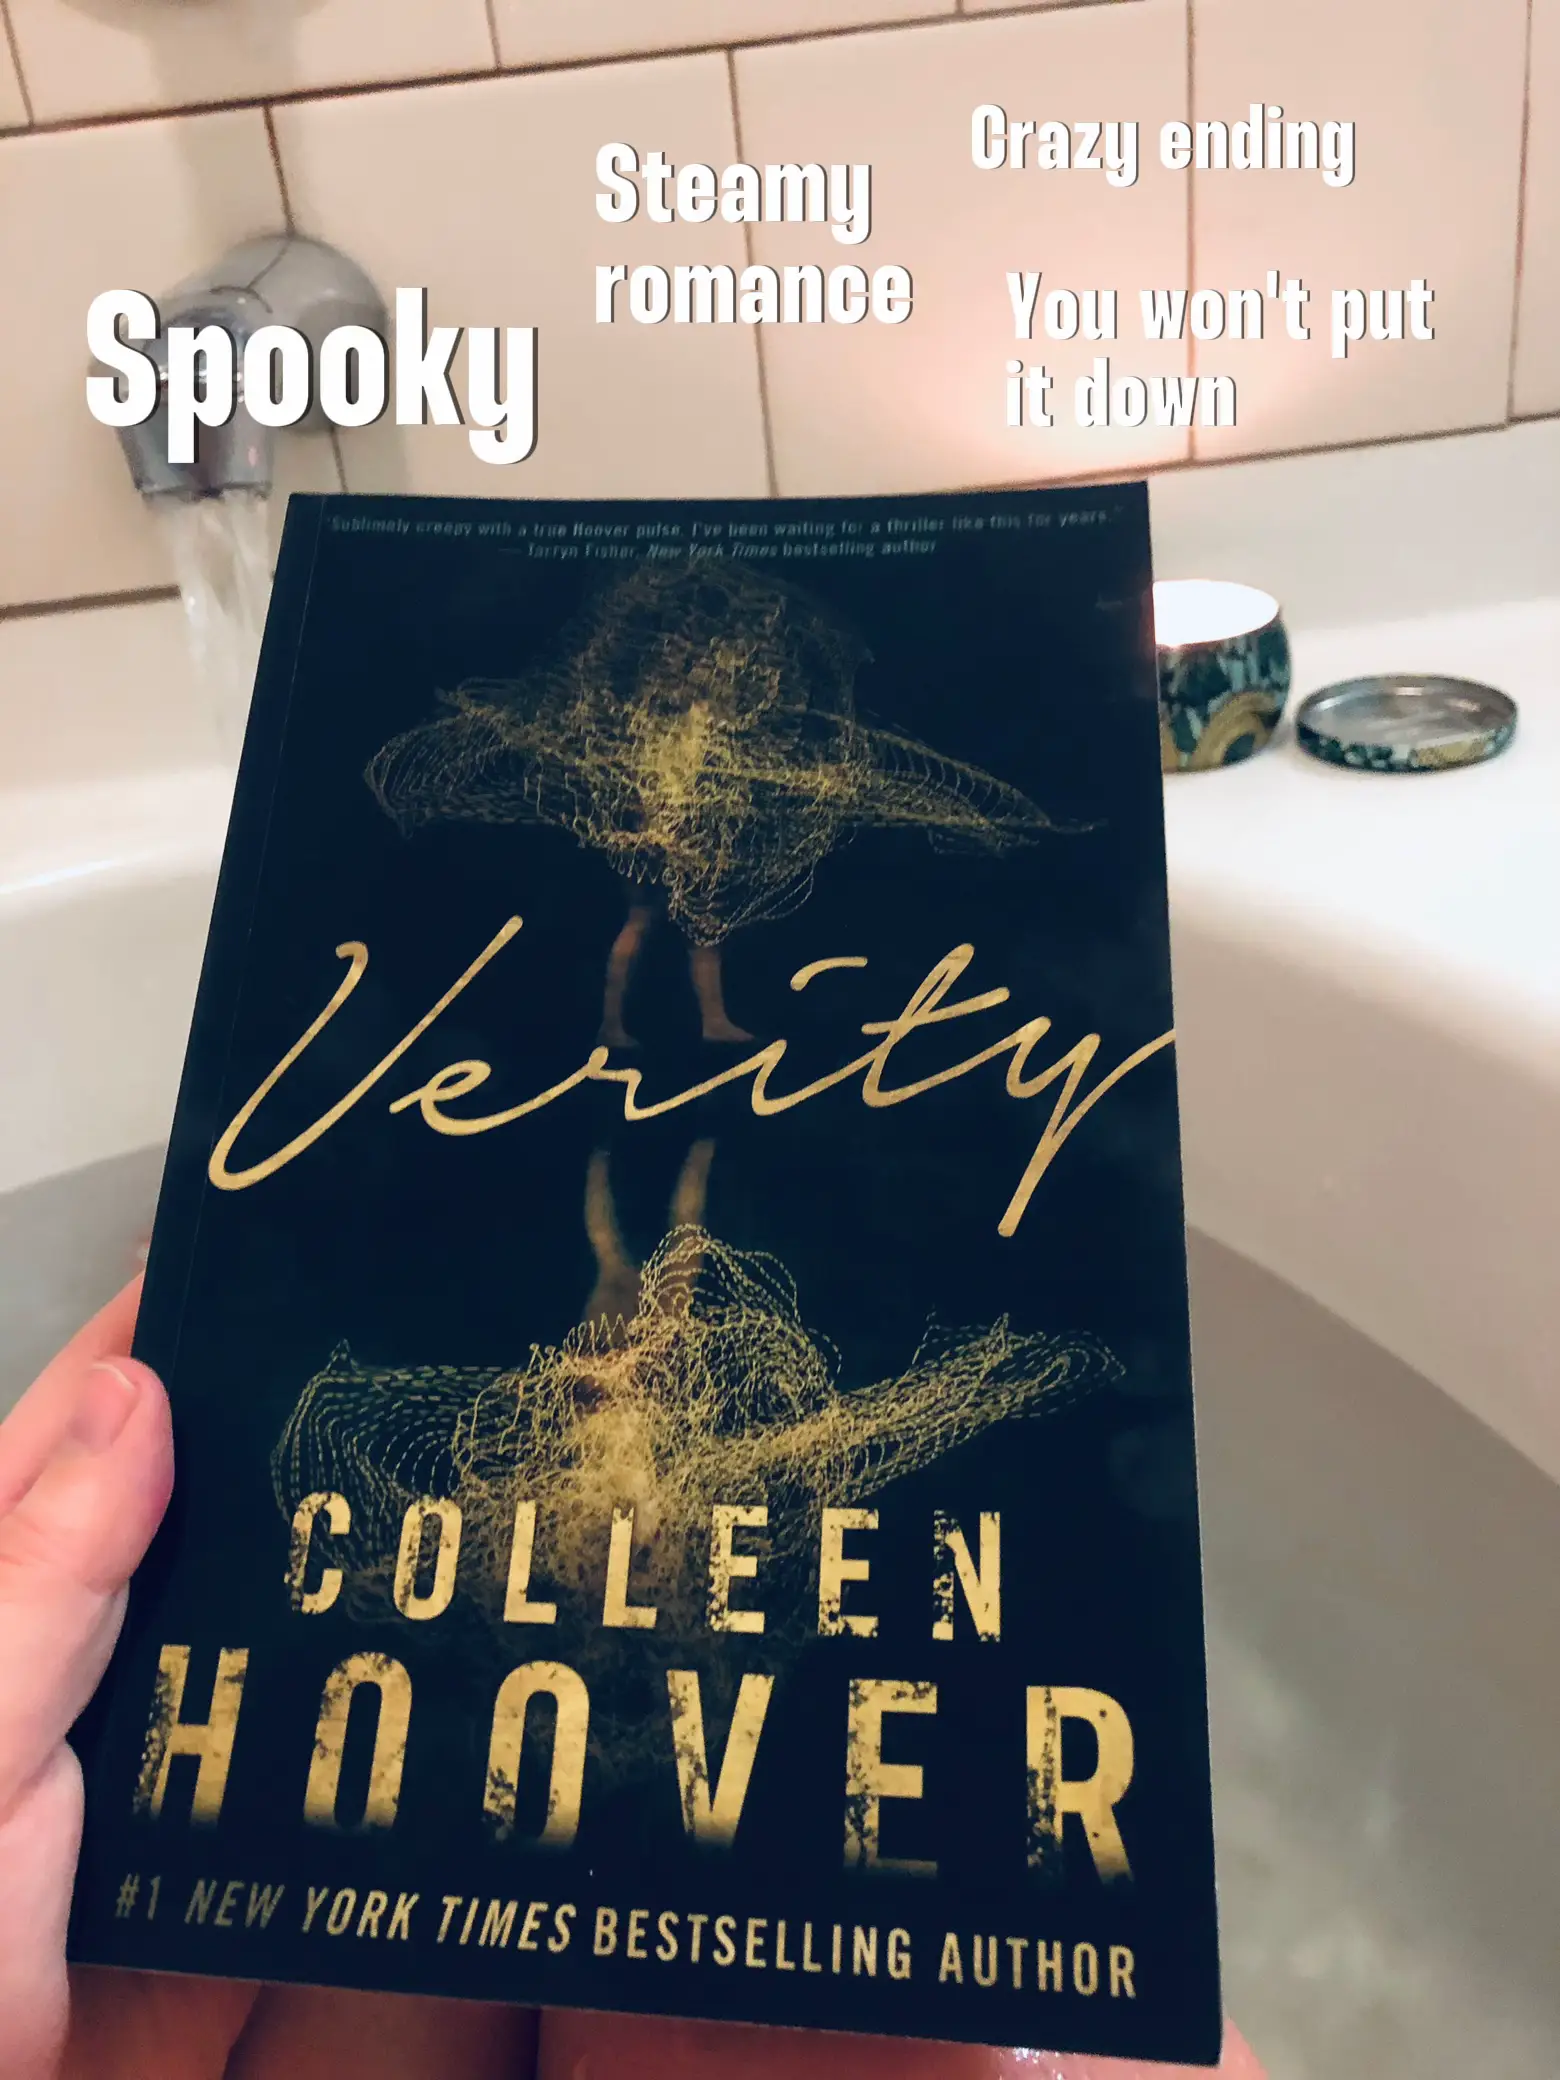 Exploring the Insane World of Colleen Hoover (Part 1) 